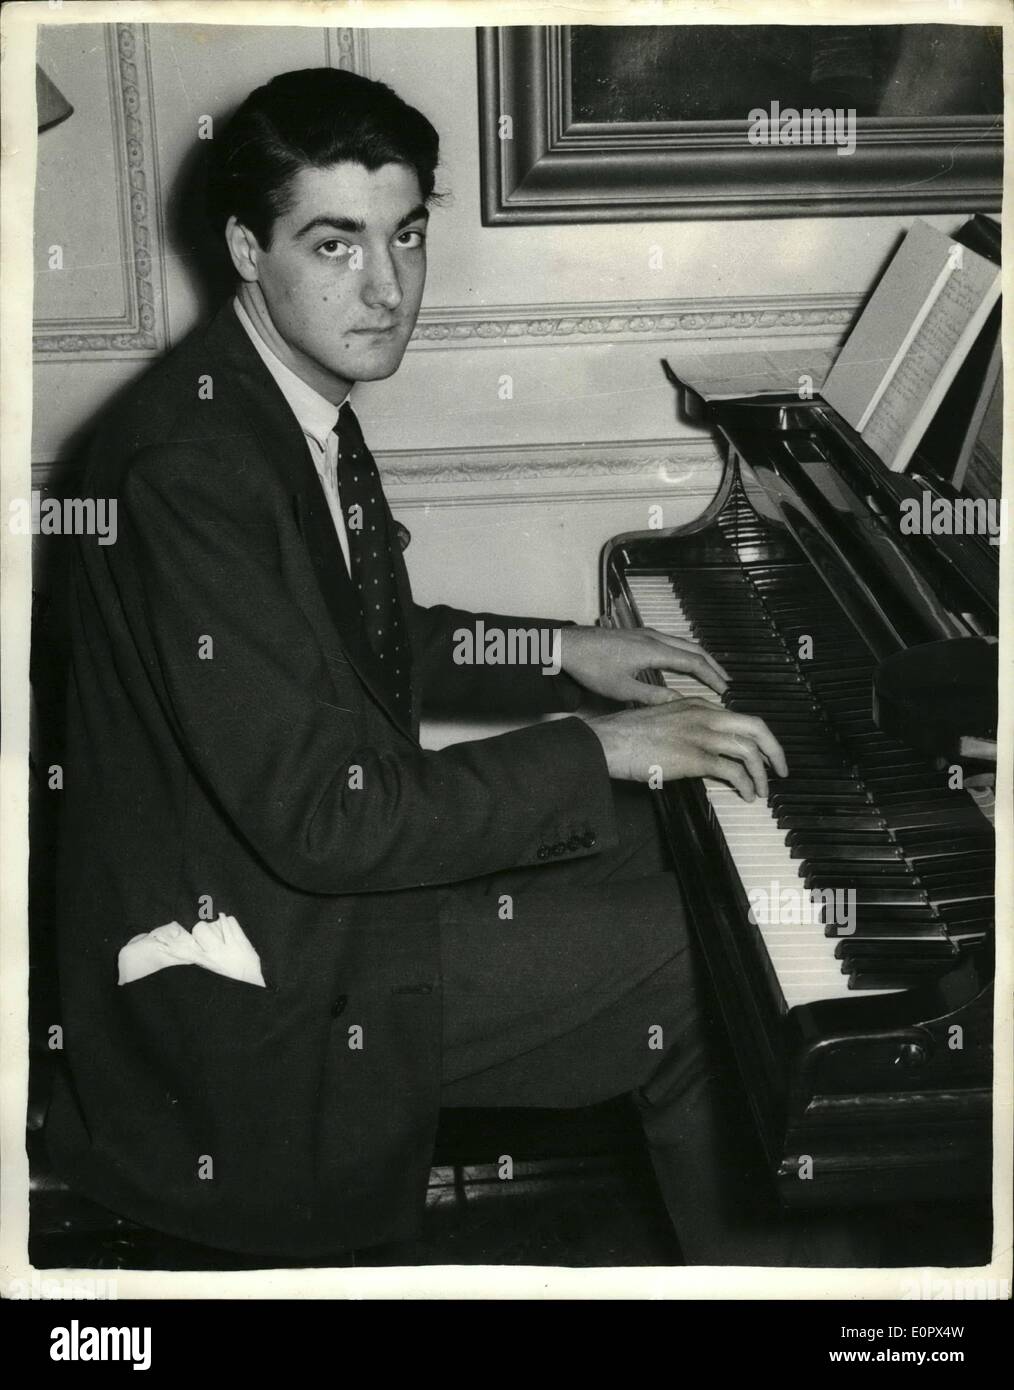 Apr. 04, 1957 - Lord Londonderry's Ambition is to Become a Concert Pianist The Marquess of Londonderry, who practices four hours a day on the piano, seen at home yesterday. His ambition is to become a concert pianist. Stock Photo